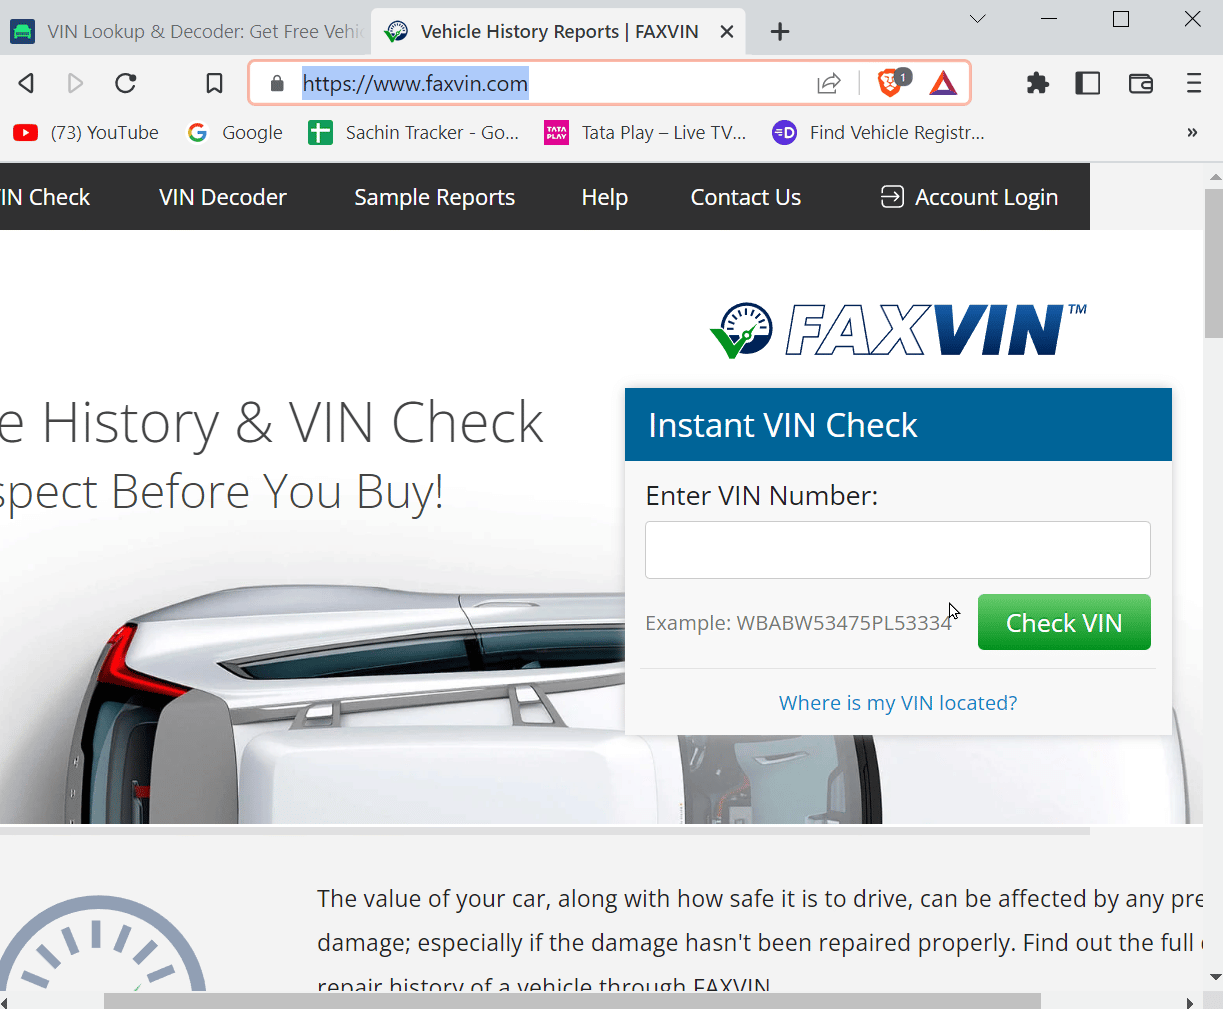 FAXVIN homepage